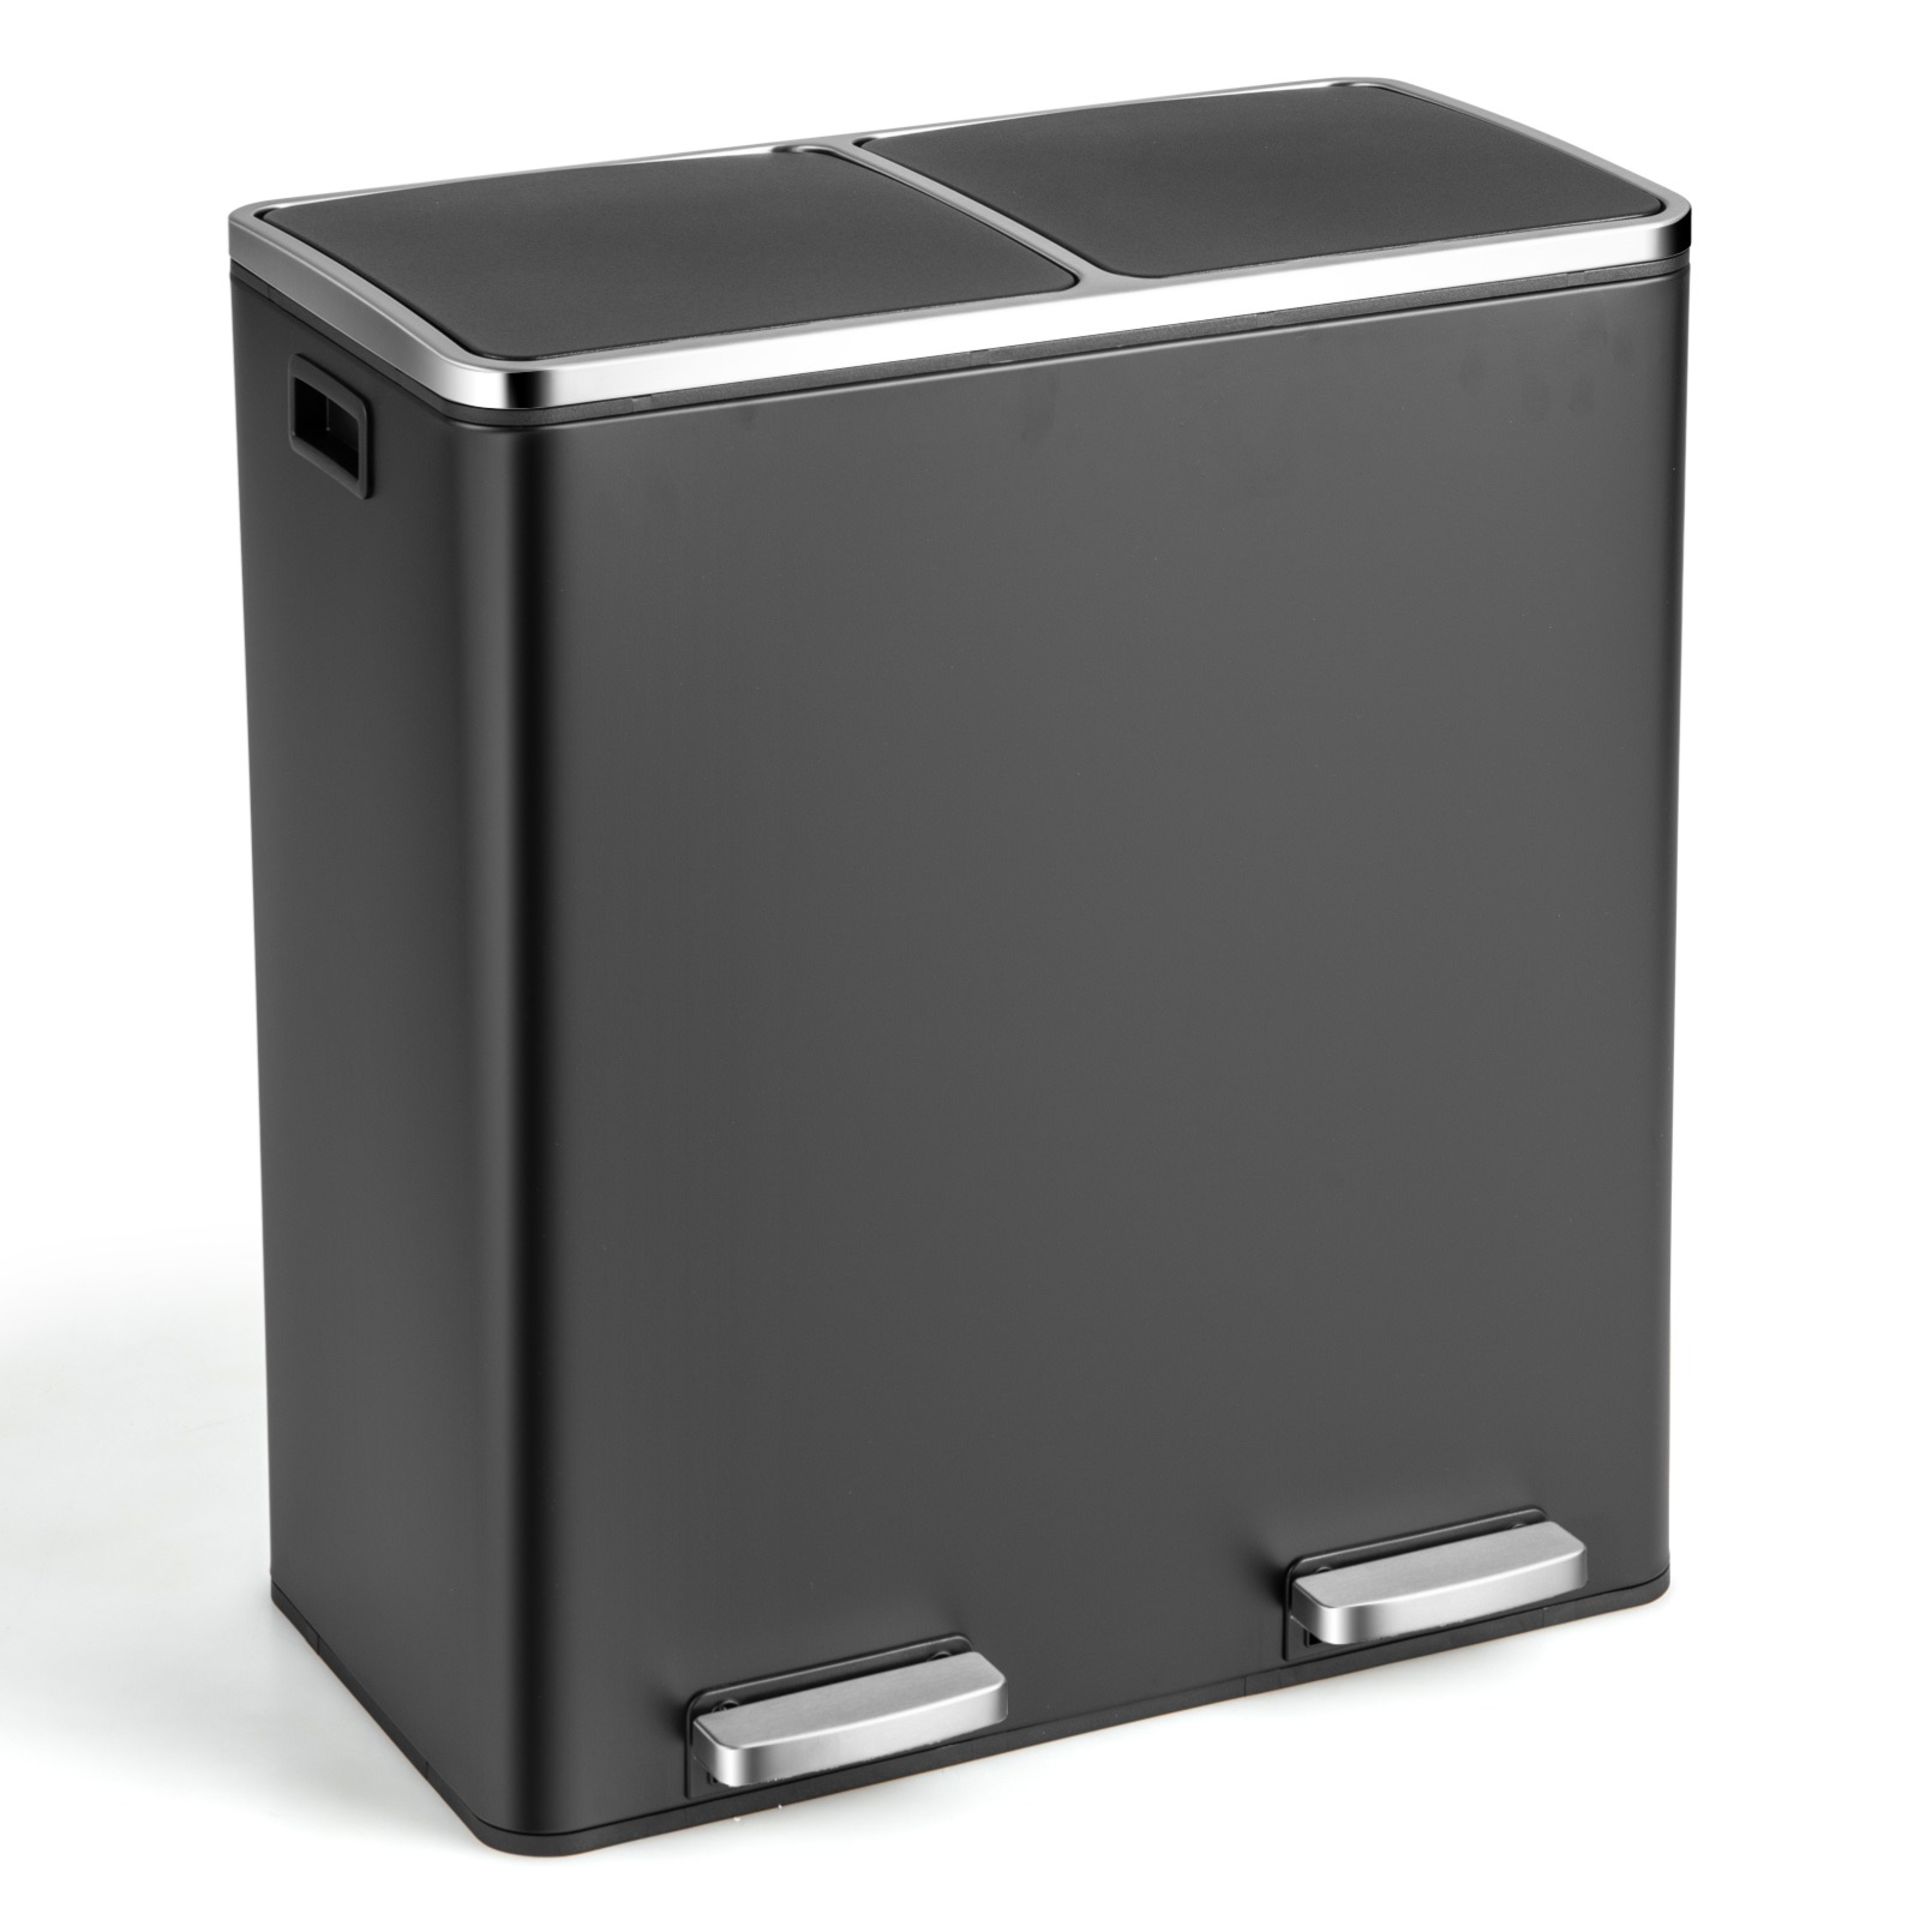 Double Recycle Pedal Bin wth Dual Removable Compartments-Black - ER54